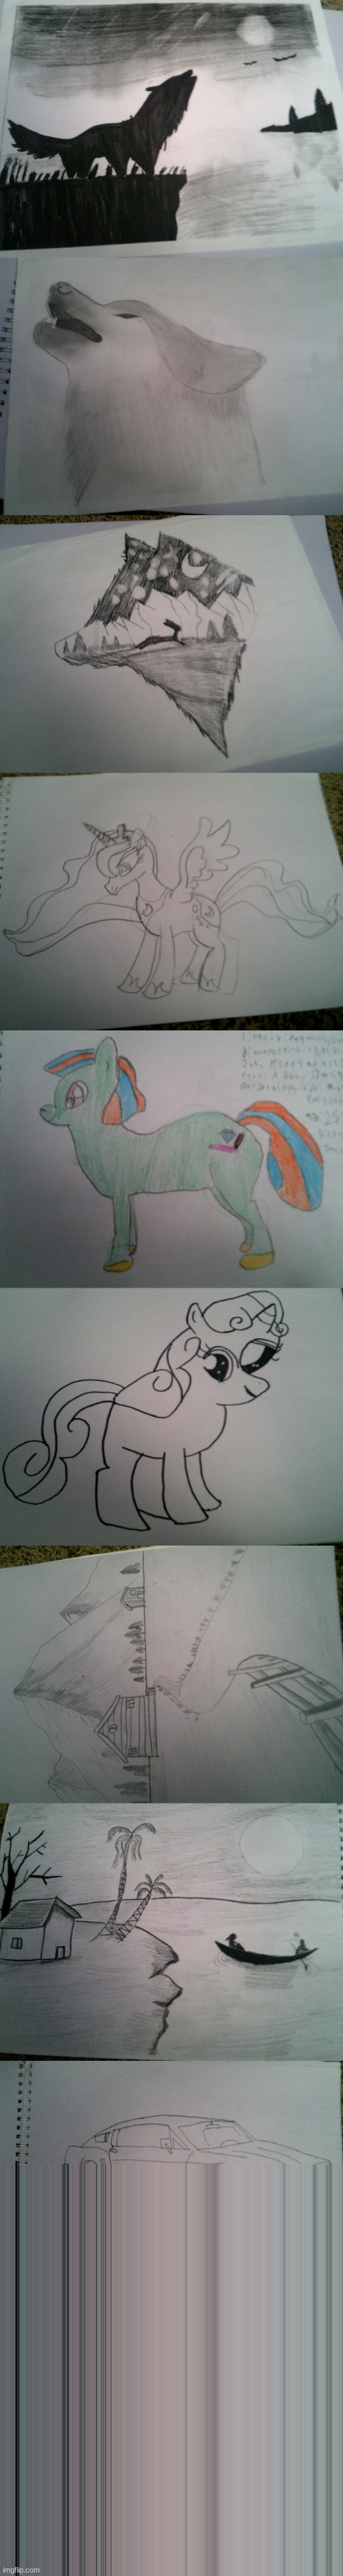 my drawings | image tagged in mlp,fun,drawings,cars,wolves | made w/ Imgflip meme maker